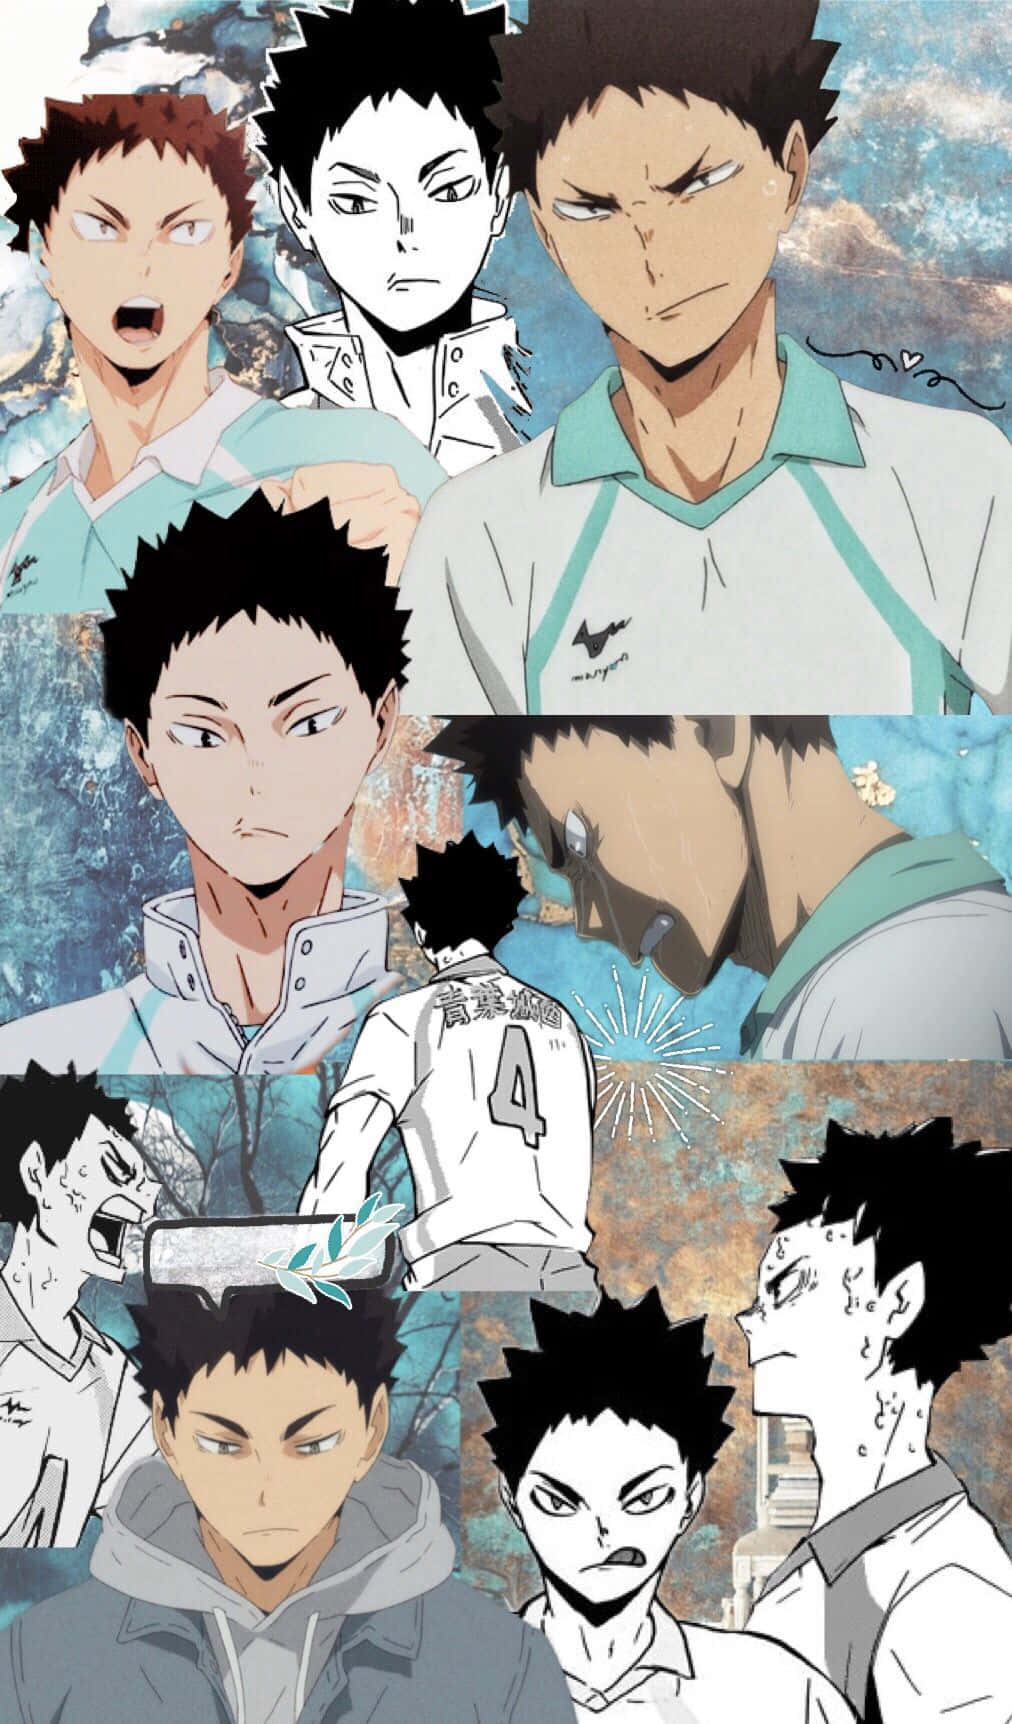 Iwaizumi Hajime in action, striking a volleyball during a match Wallpaper